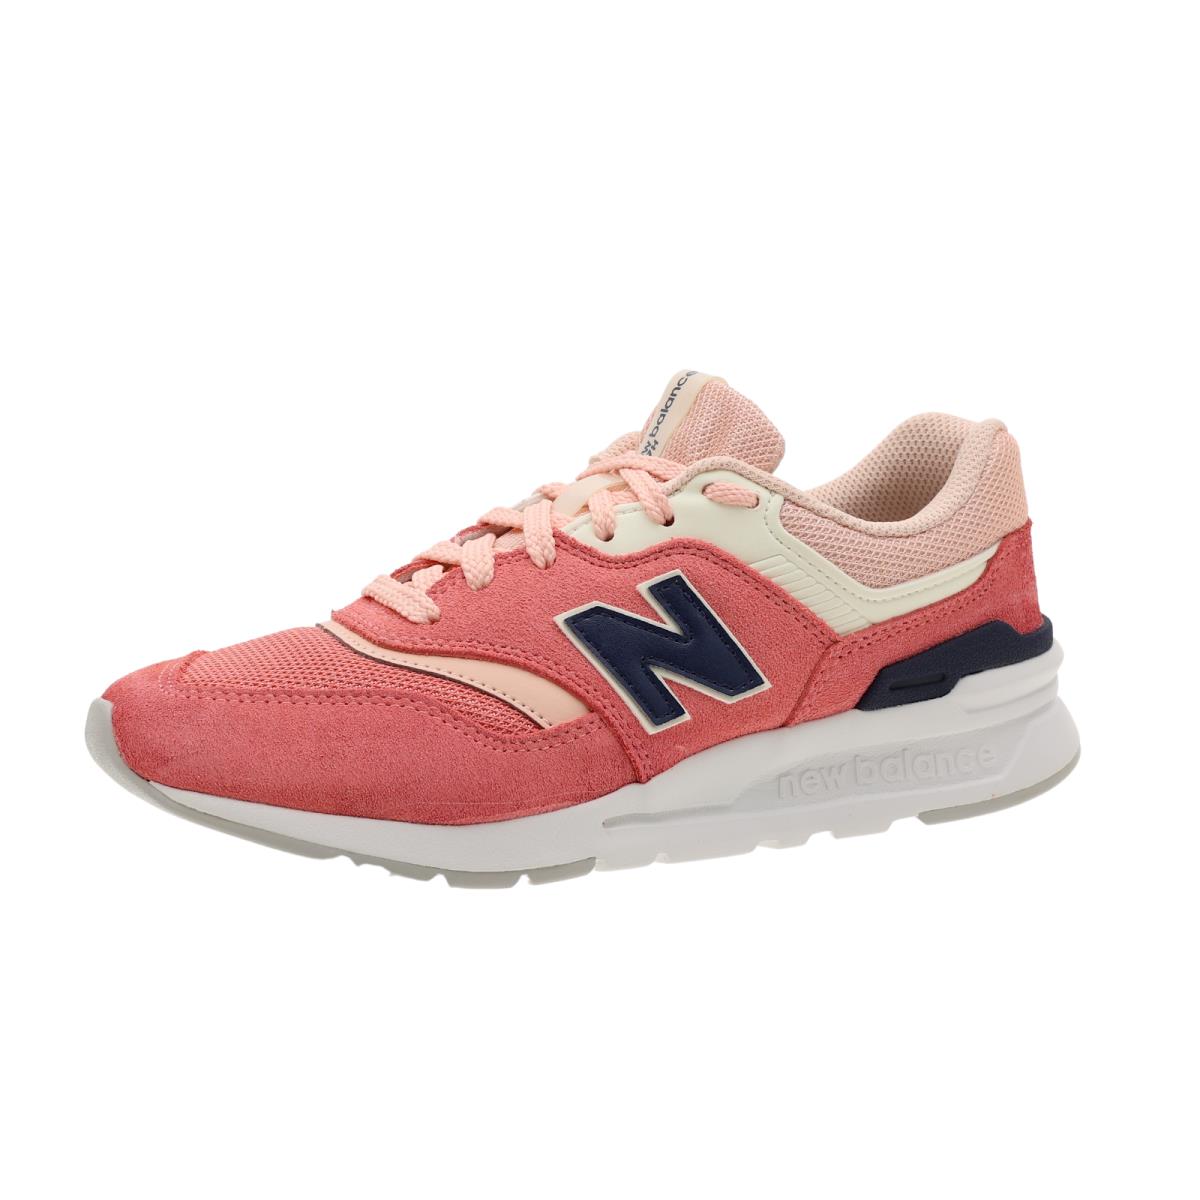 New Balance Women`s Classics 997H Pink Sneaker Shoes N7989 Size 6 - Pink